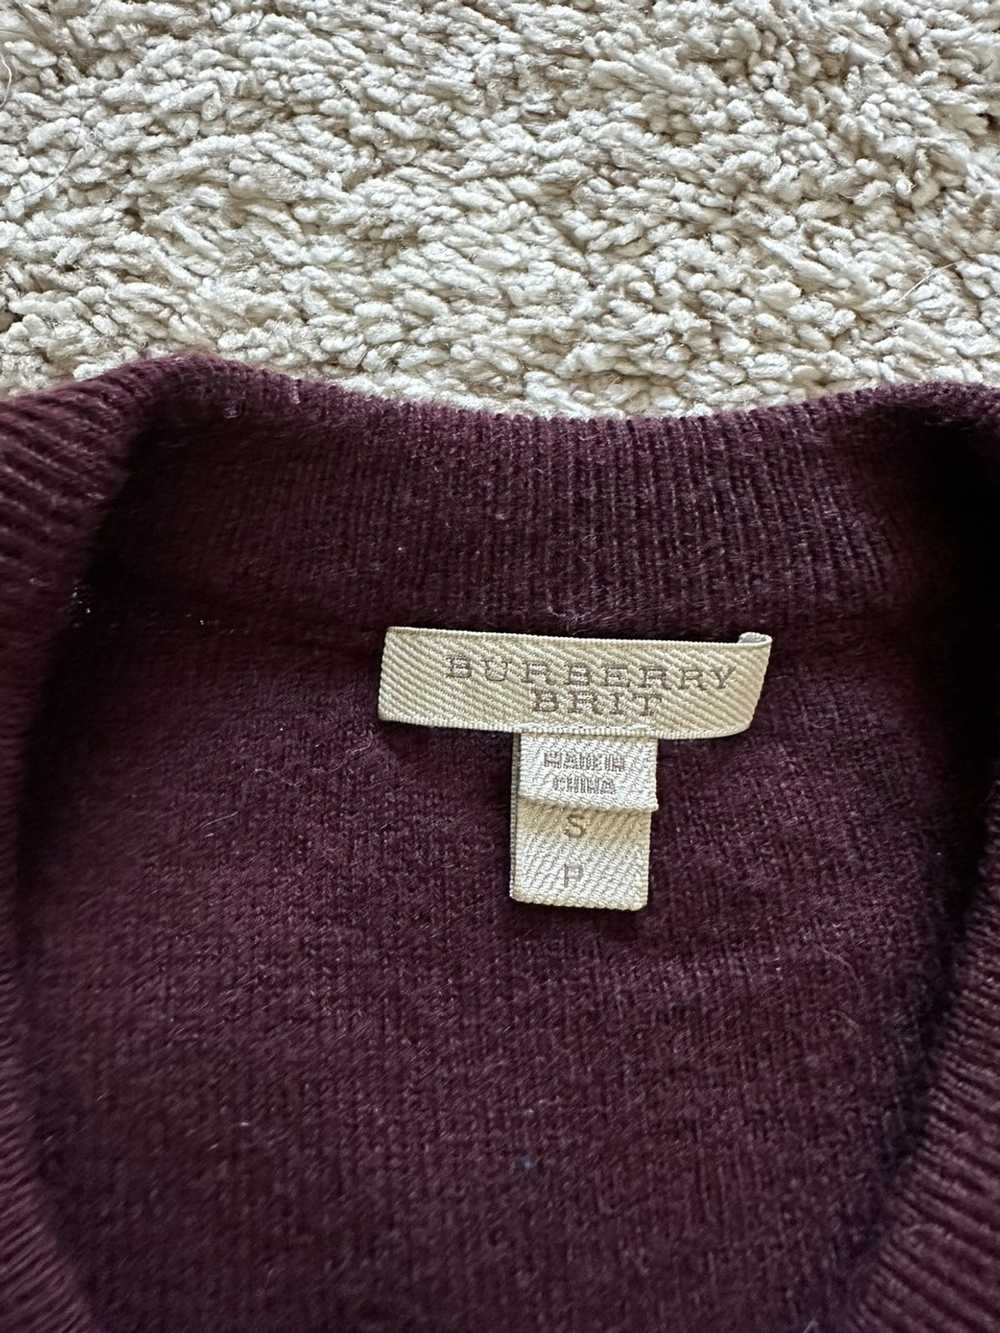 Burberry Burberry Brit Sweater Wool striped Small - image 4